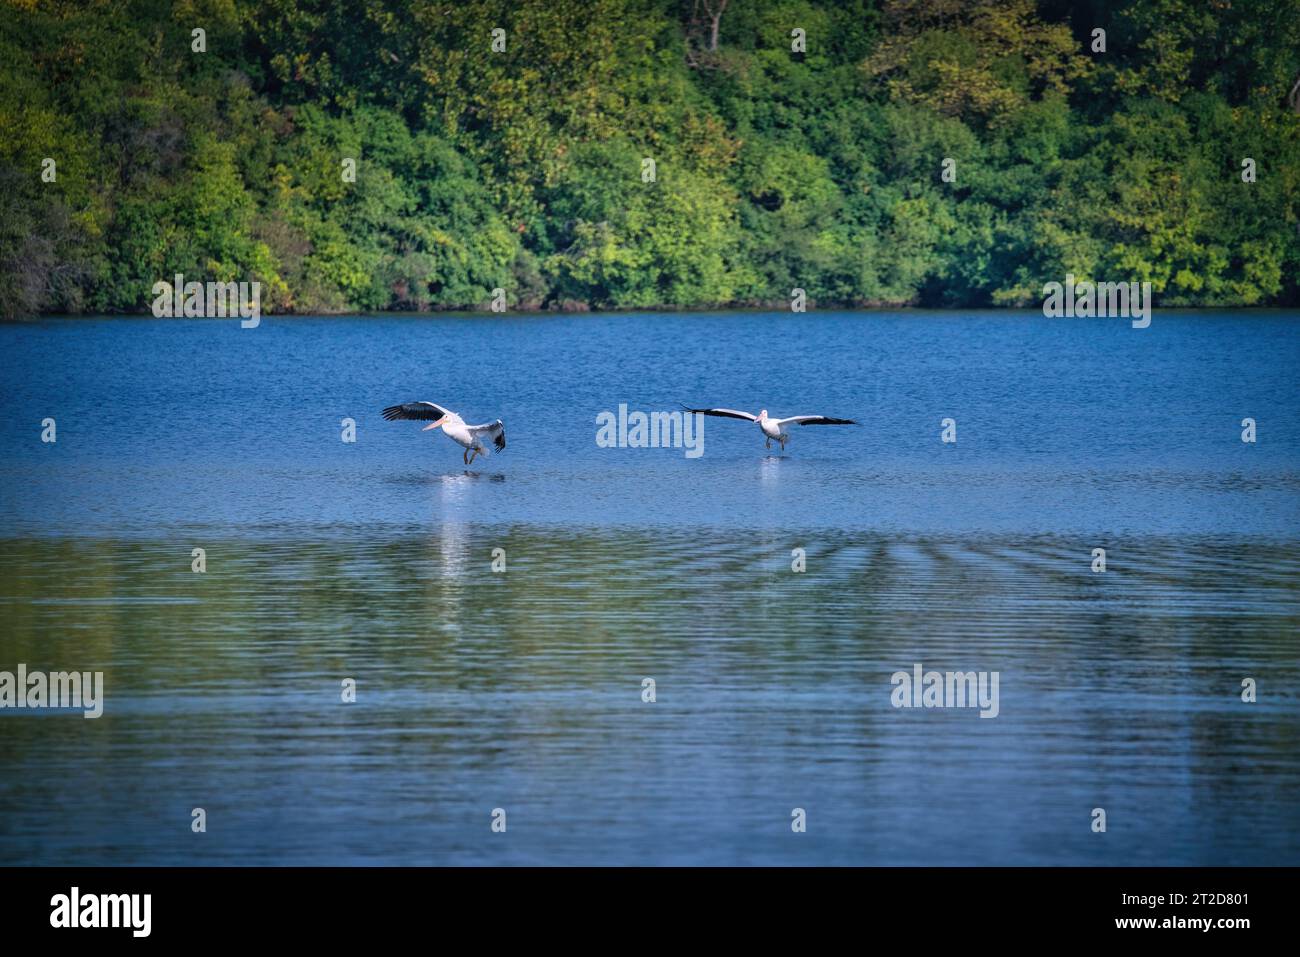 White Pelican Birds Fly in the Sky Heading Towards a Lake on a Sunny Day Stock Photo